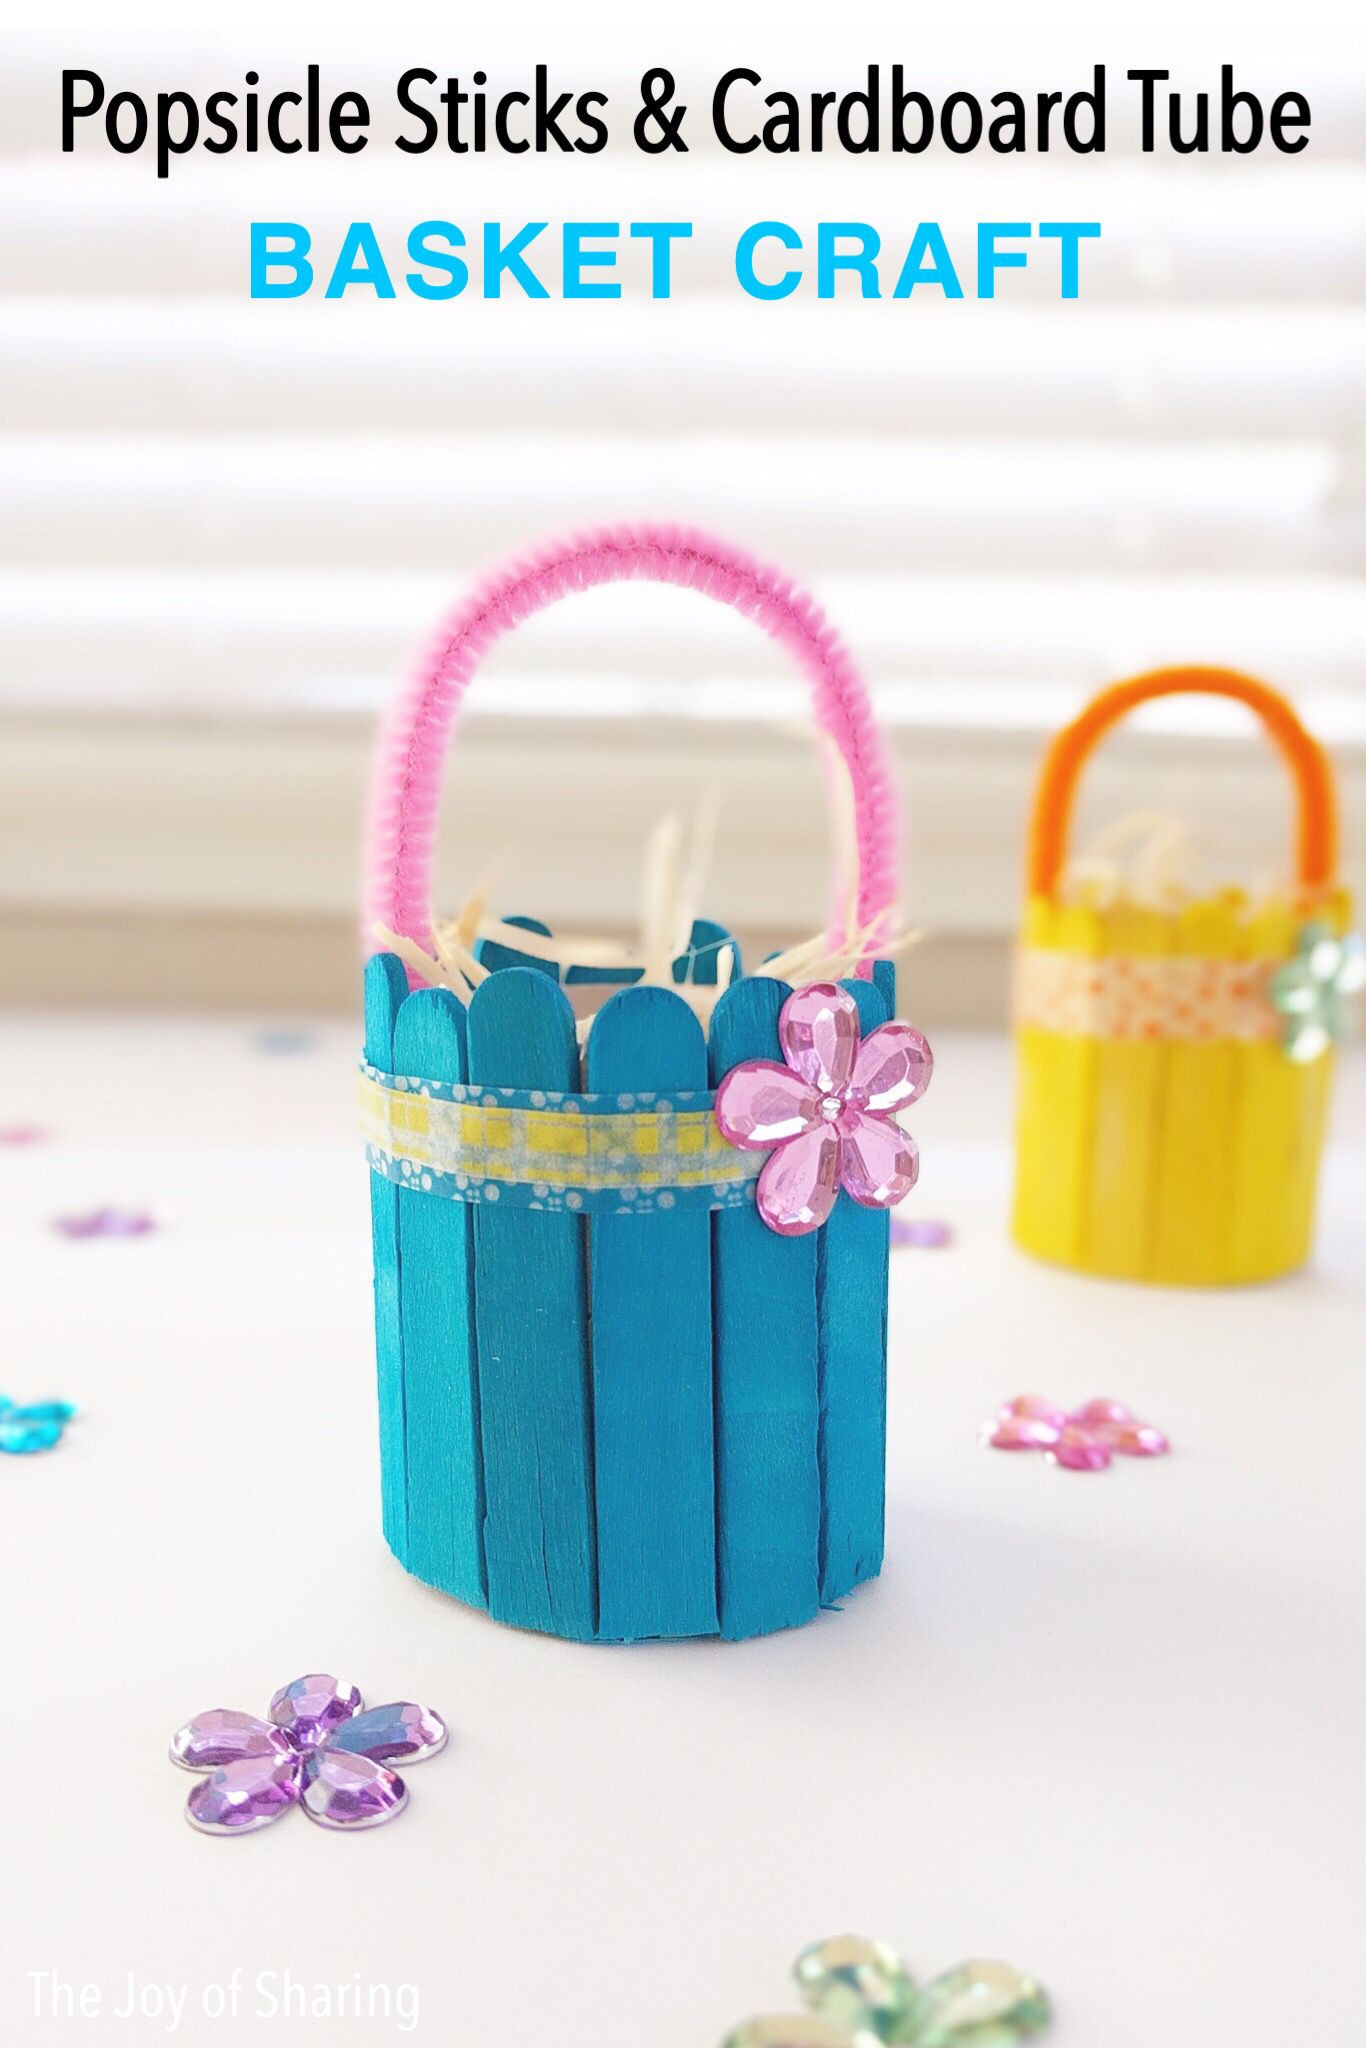 Easter Basket Craft Ideas For Preschoolers
 Cute And Easy Easter Basket Craft